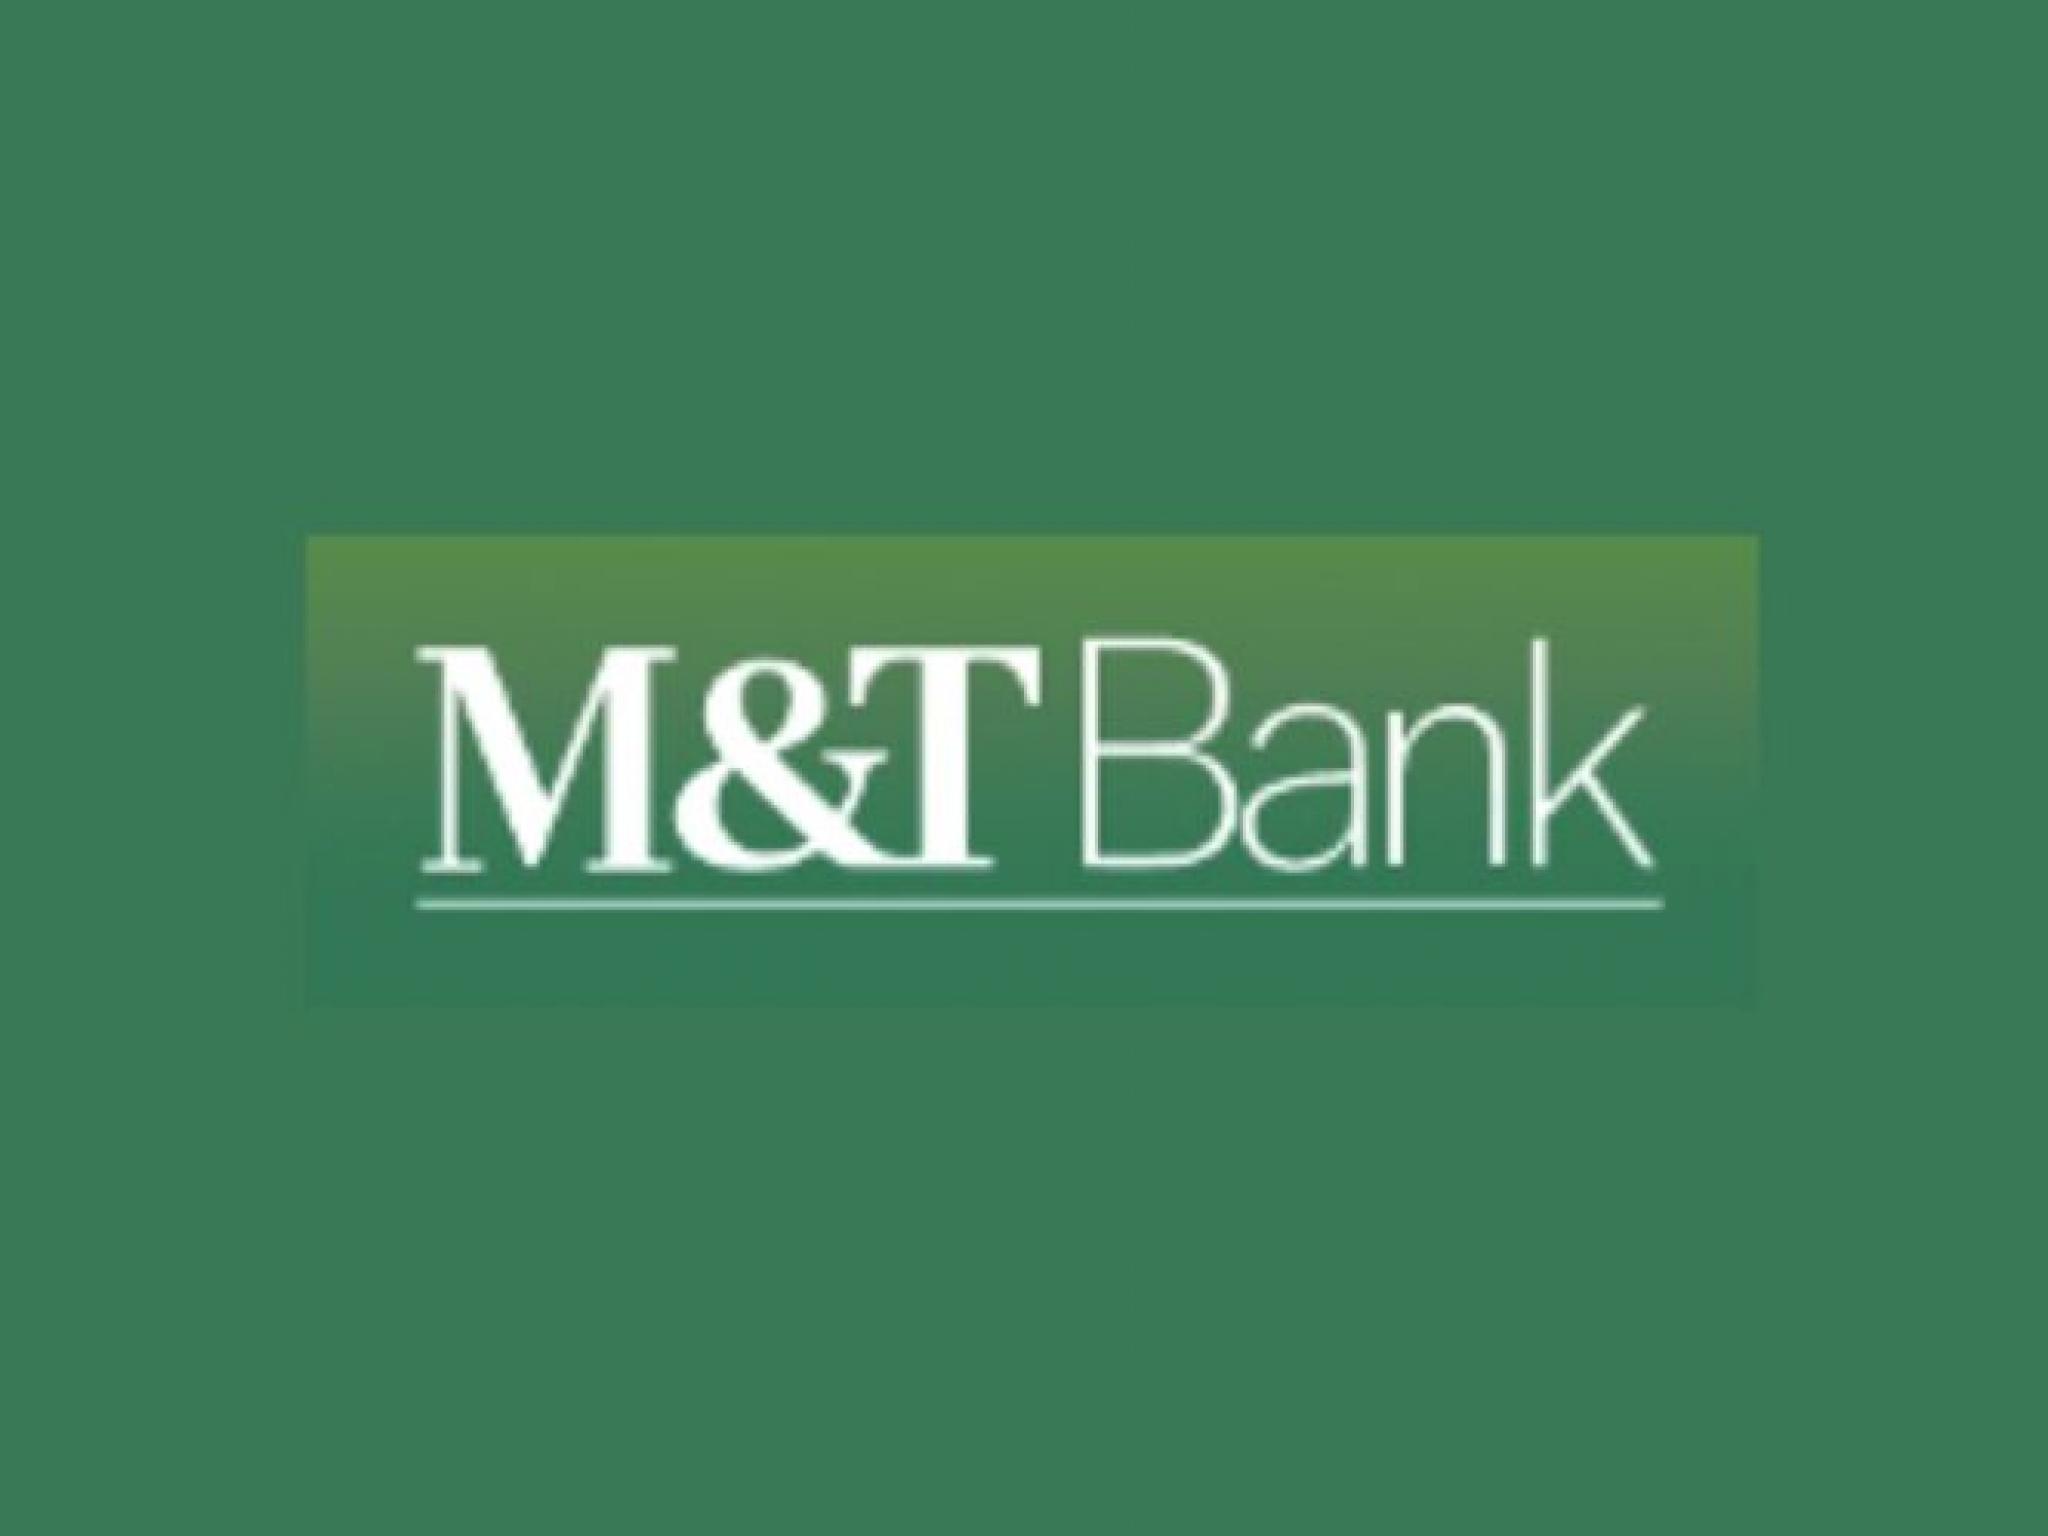  mt-bank-analysts-boost-their-forecasts-following-upbeat-earnings 